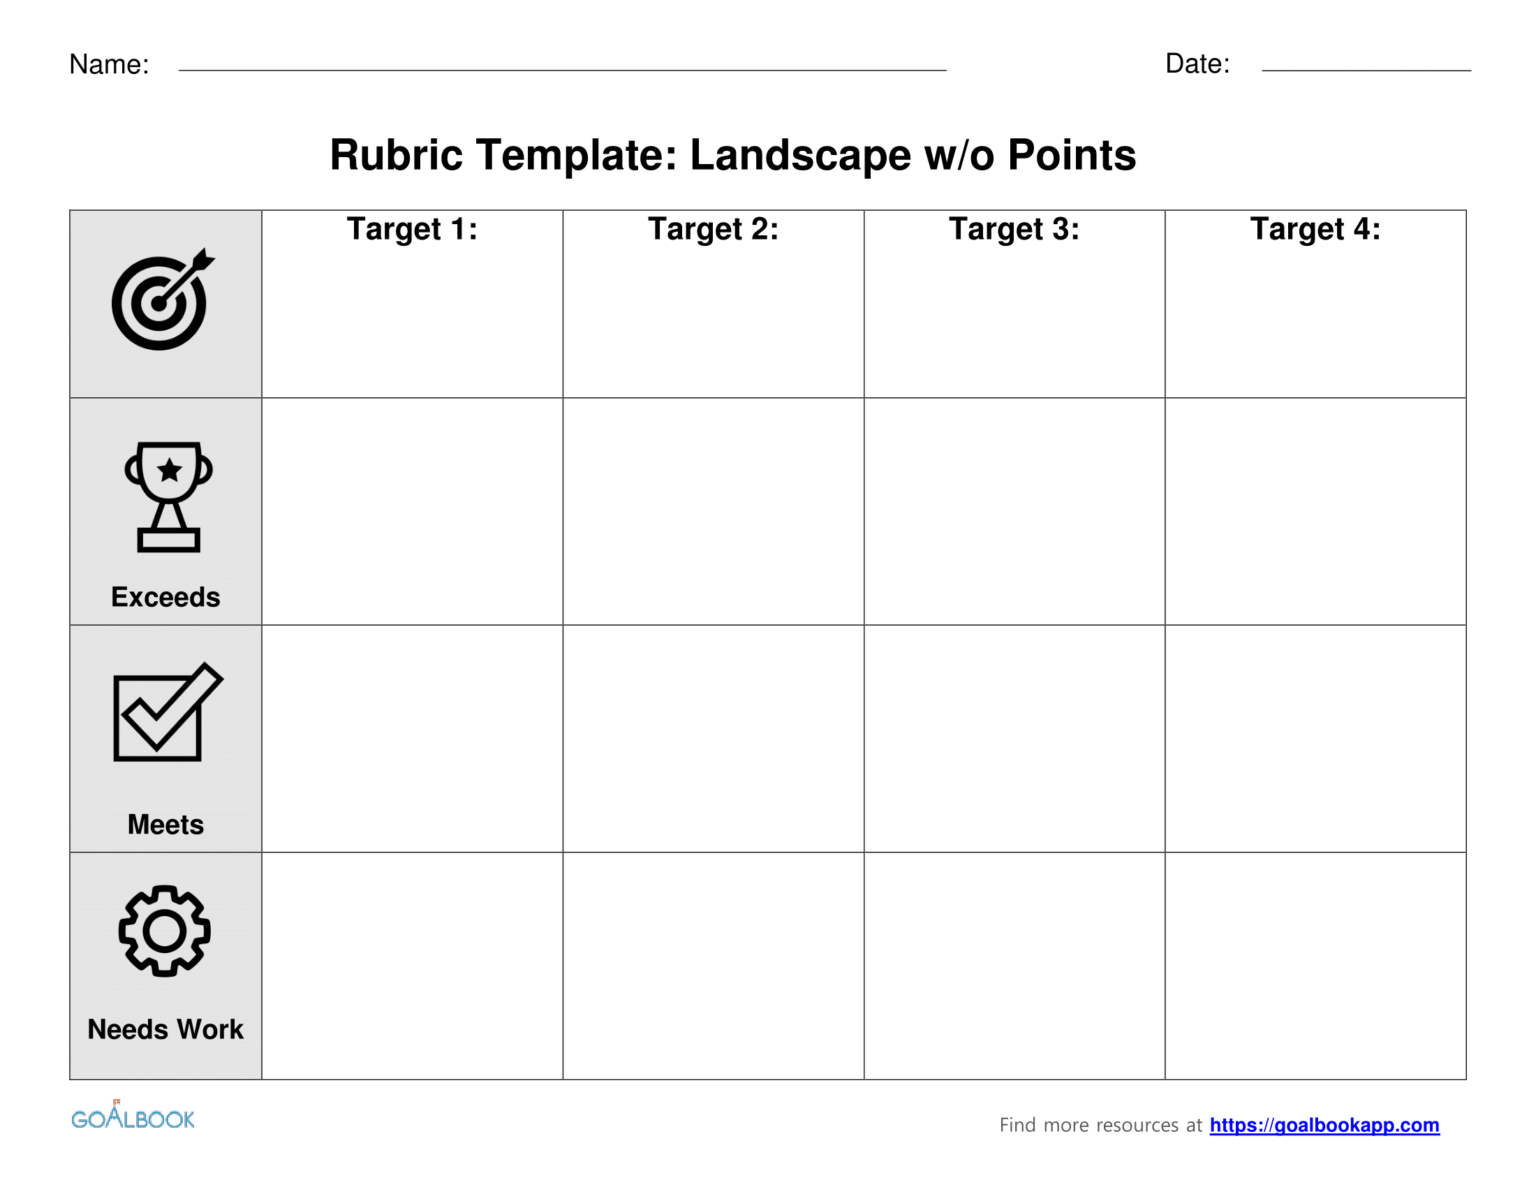 Free Printable Rubric Template ] - Top Essay Writing Essay in Blank Rubric Template